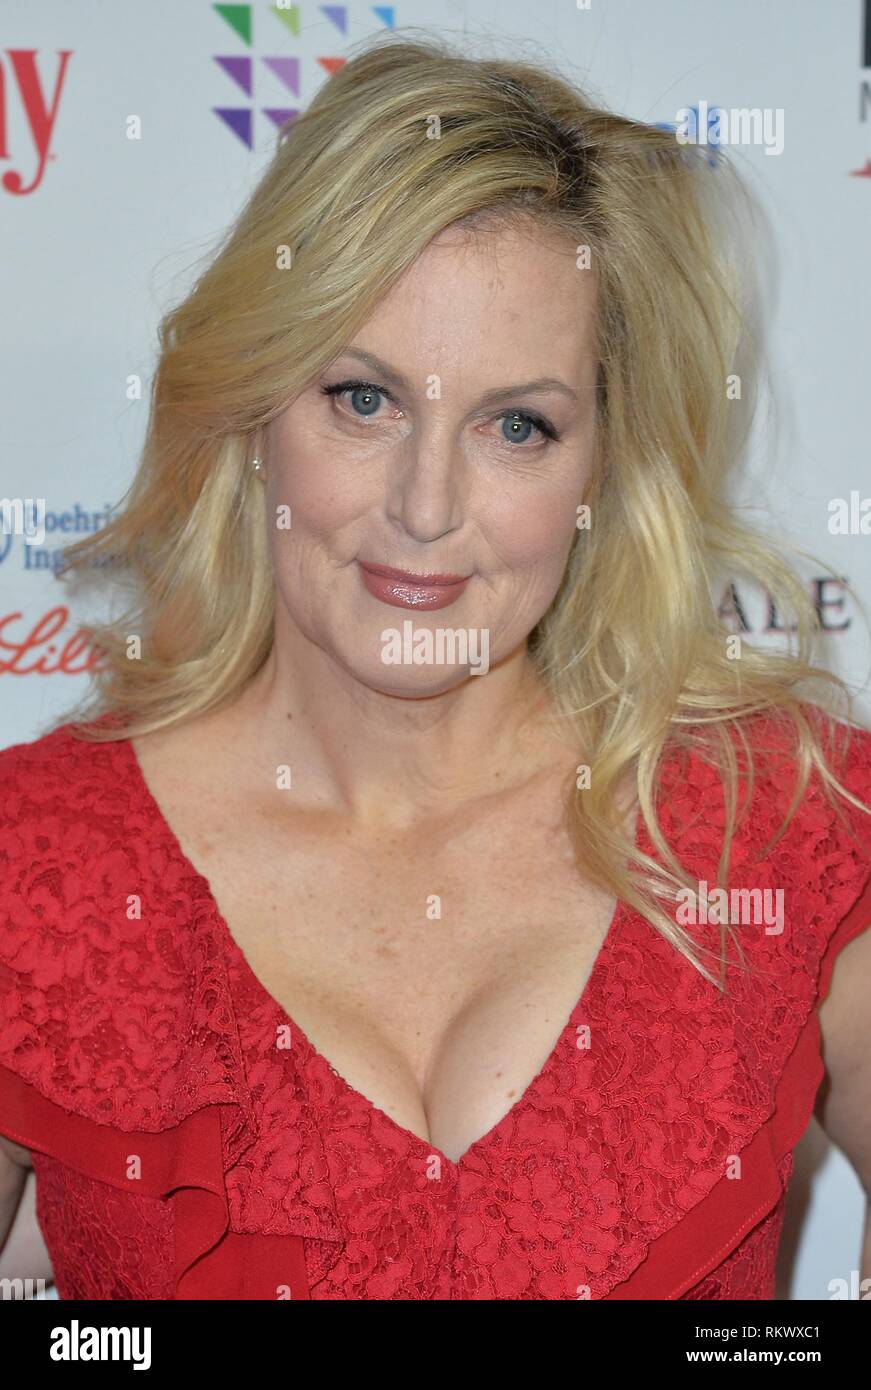 New York, NY, USA. 12th Feb, 2019. Ali Wentworth at arrivals for Woman's Day Red Dress Awards, The Appel Room at Jazz at Lincoln Center, New York, NY February 12, 2019. Credit: Kristin Callahan/Everett Collection/Alamy Live News Stock Photo